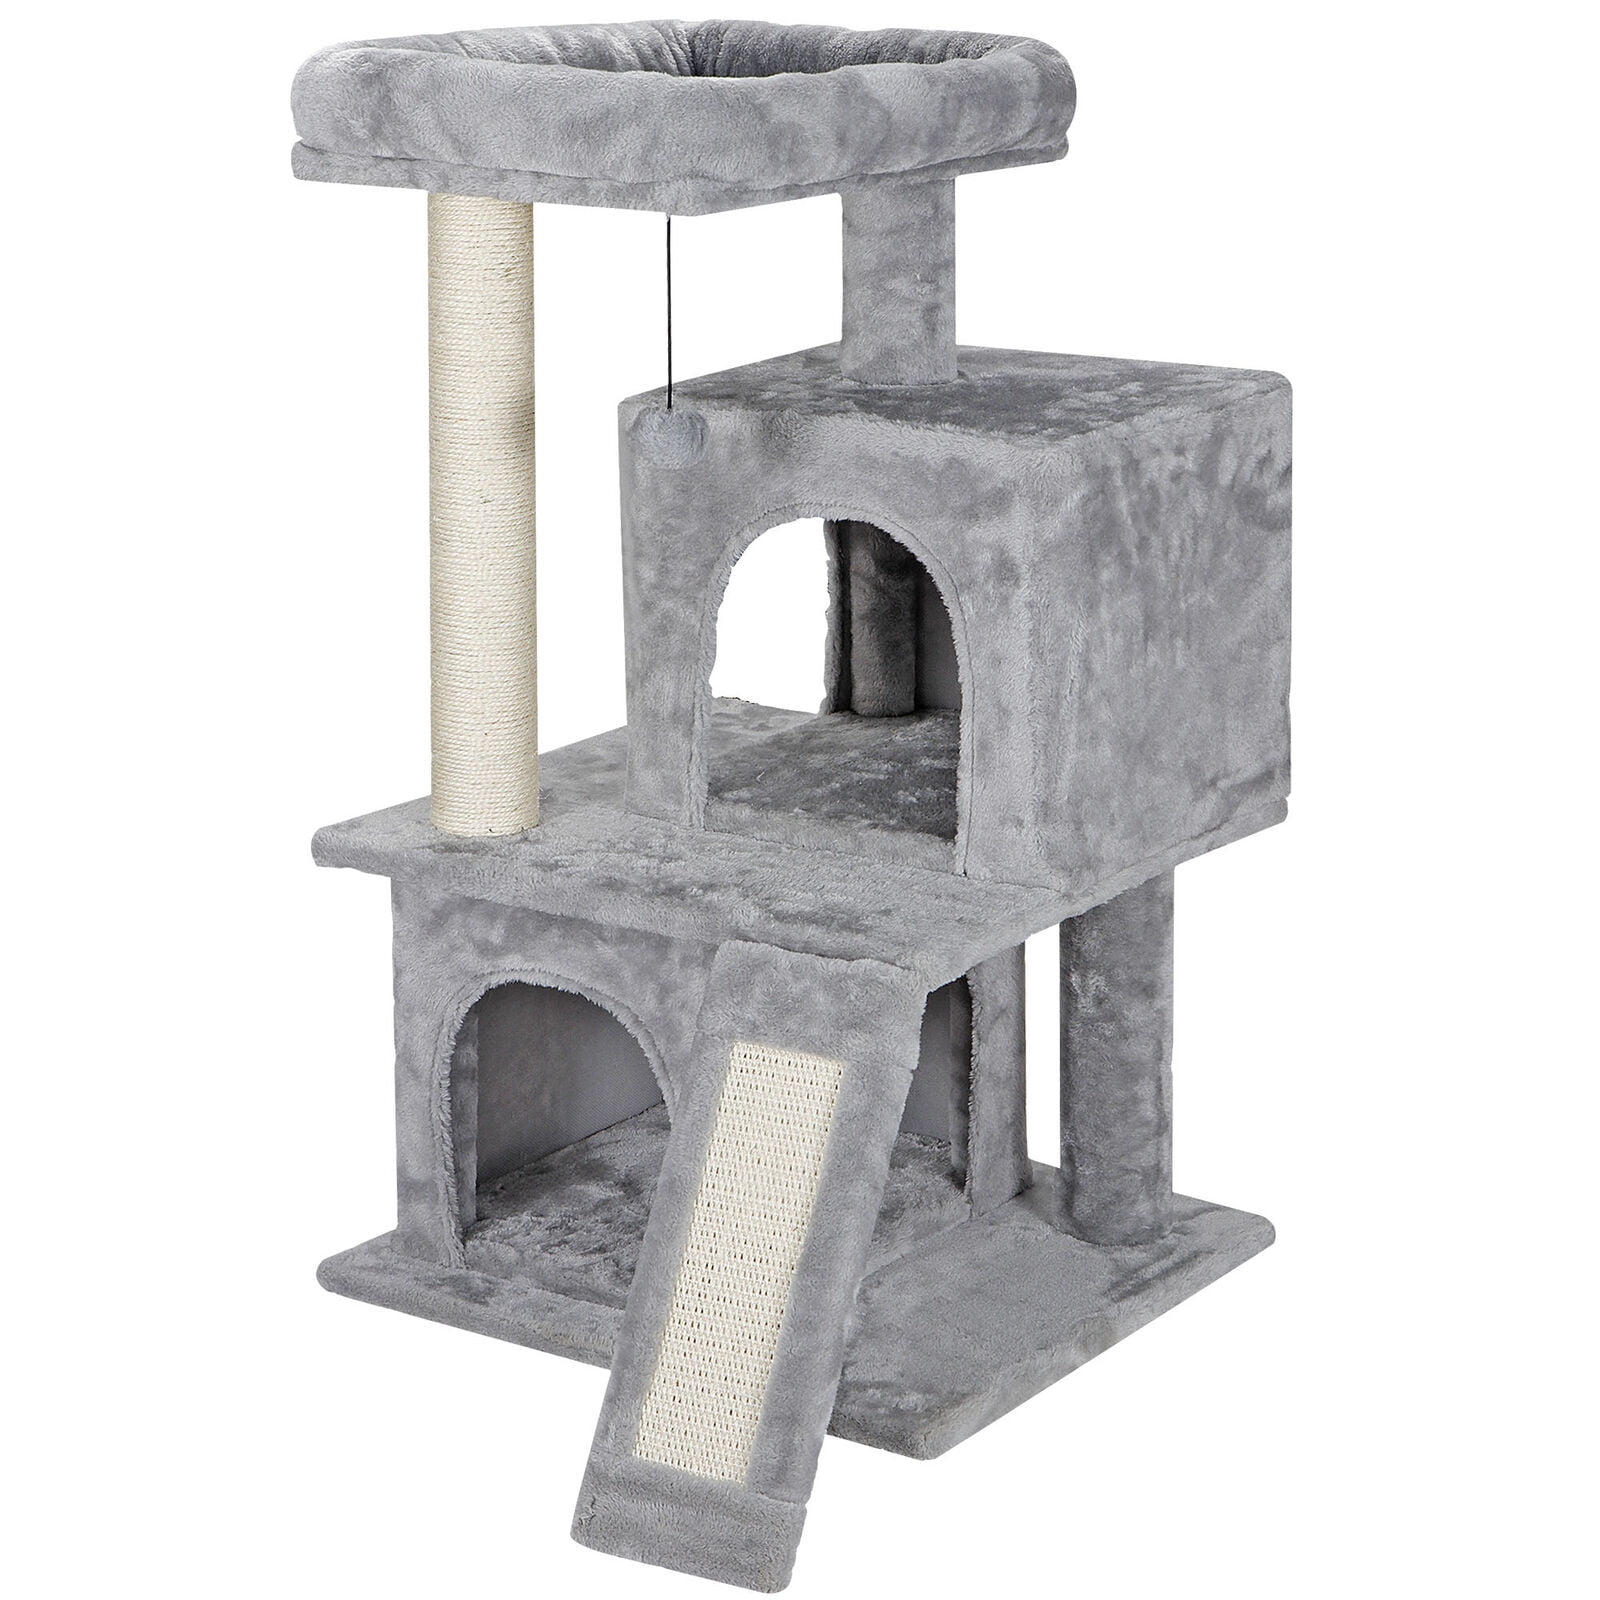 Black CAT 139cm Cat Tree Cat Tower with Sisal Scratching Posts for Indoor Cats 